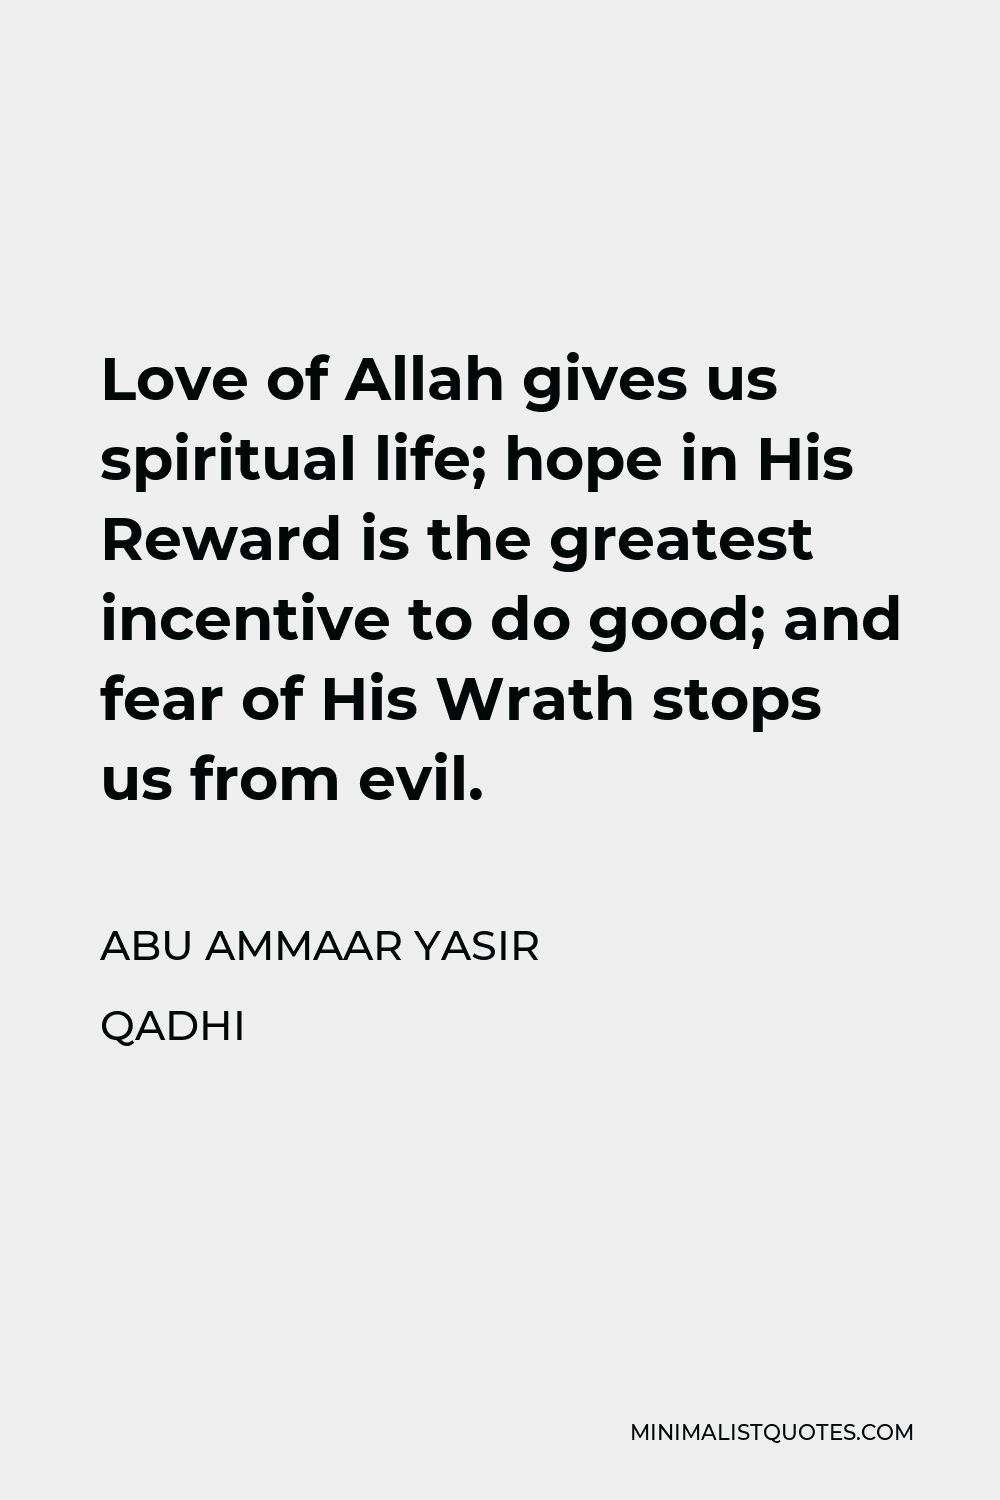 Abu Ammaar Yasir Qadhi Quote - Love of Allah gives us spiritual life; hope in His Reward is the greatest incentive to do good; and fear of His Wrath stops us from evil.